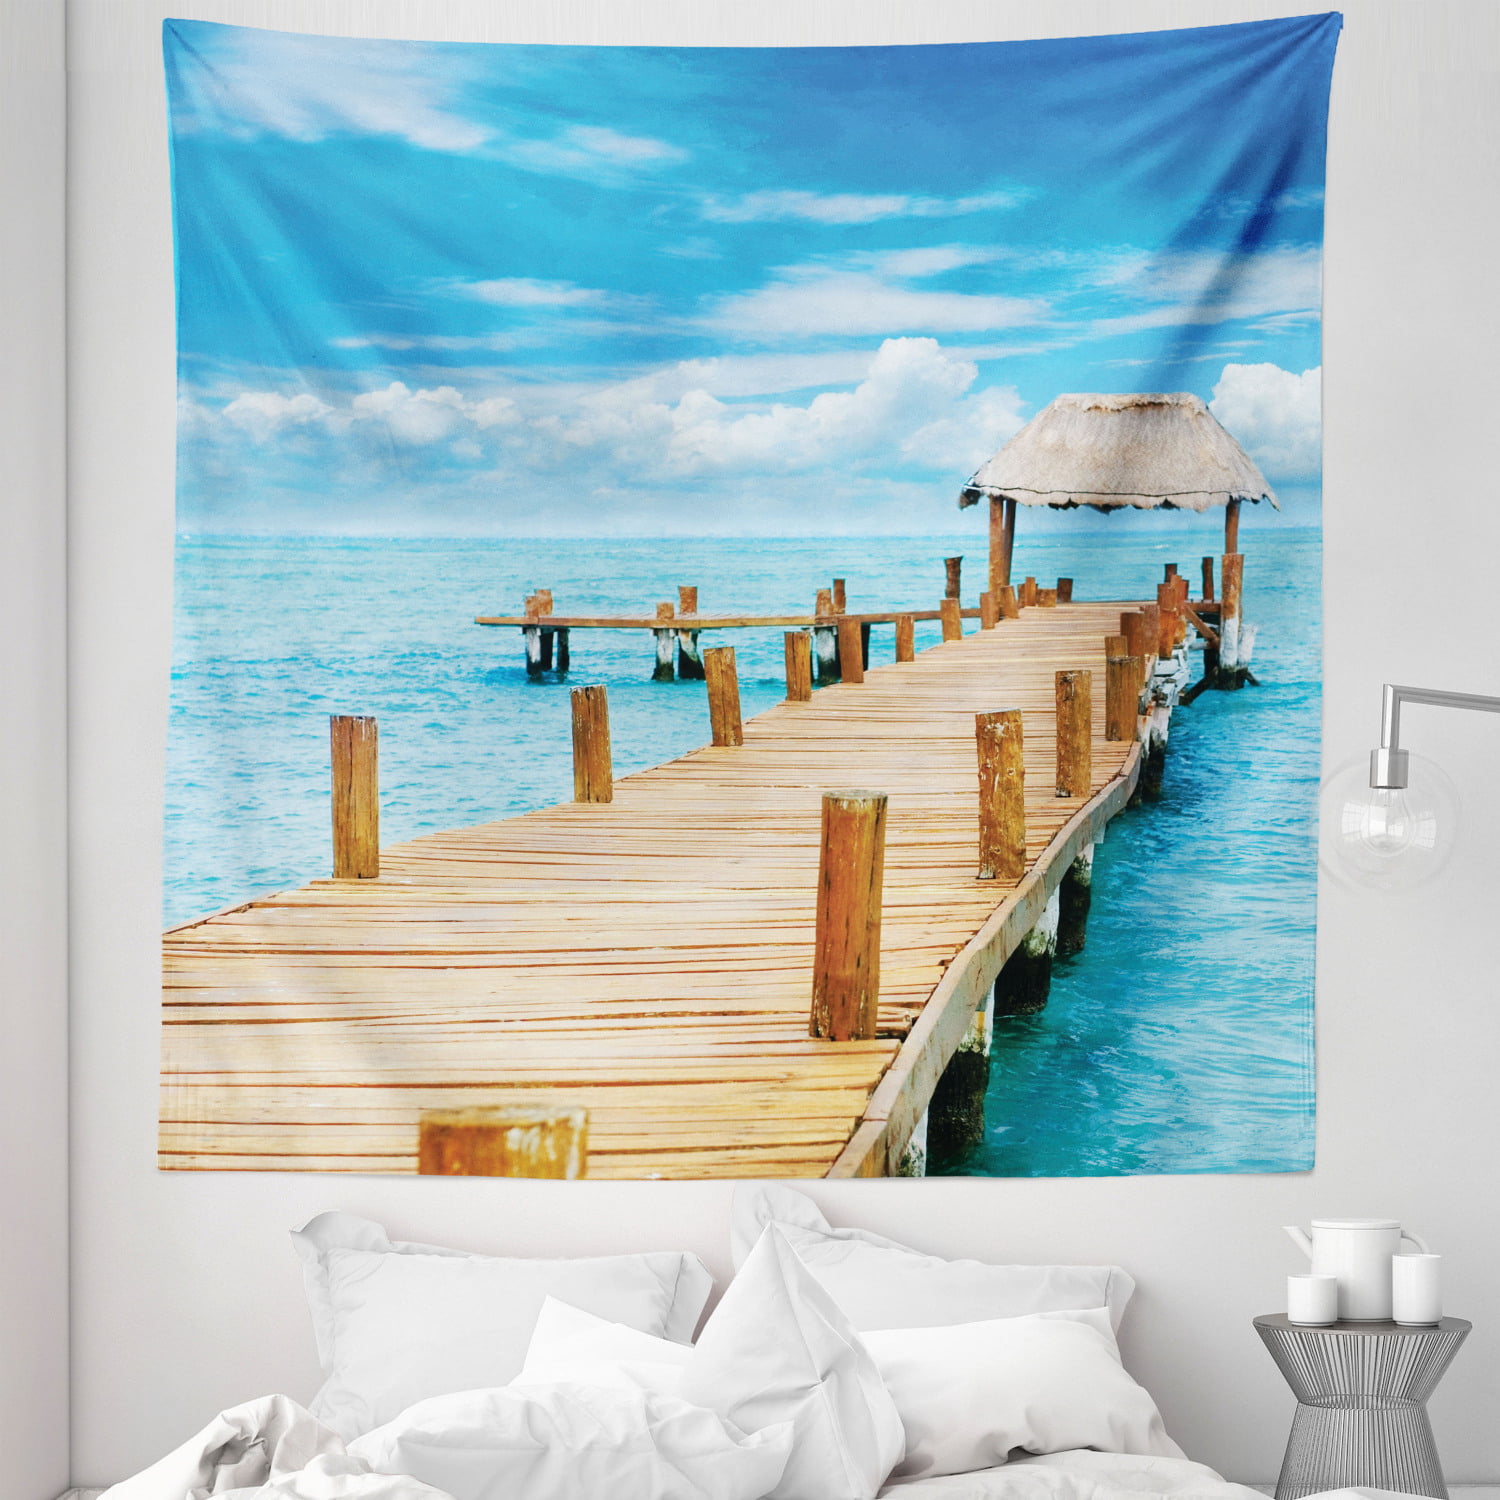 Old Jetty Pier Sea in Storm Rain Images Wall Art Tapestries Seaside Tapestry 